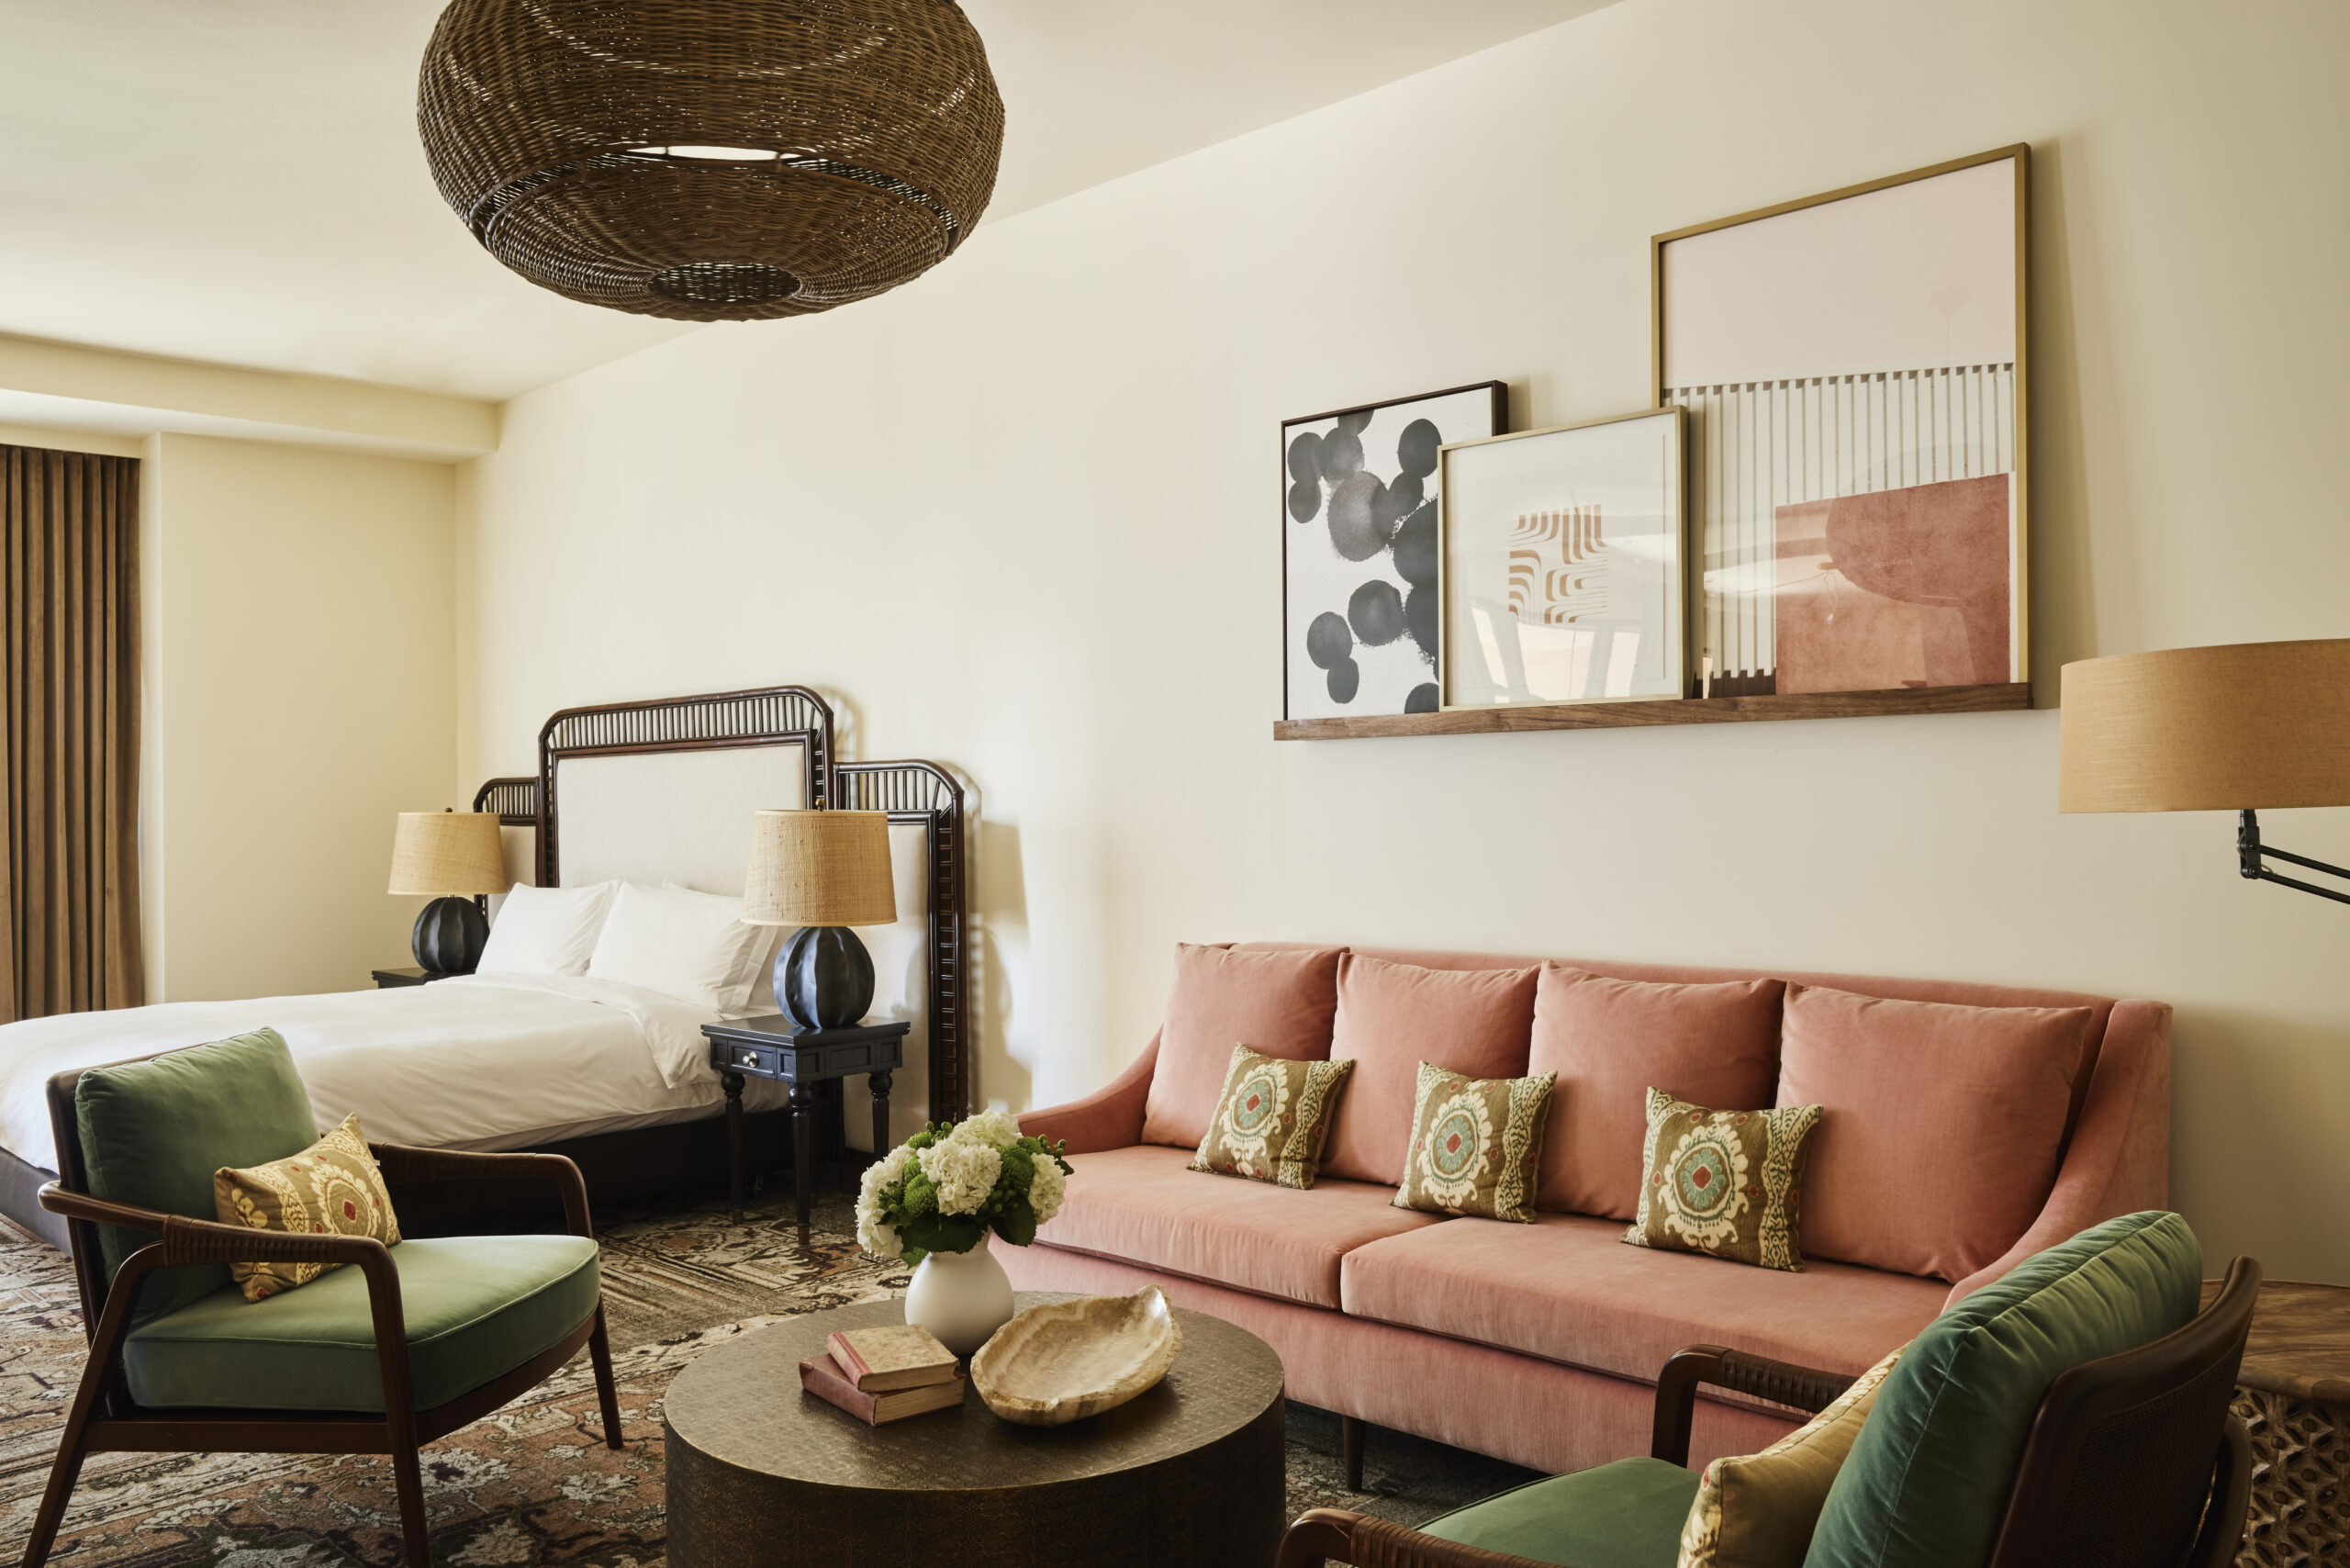 A suite in The Aster, decorated in blush tones